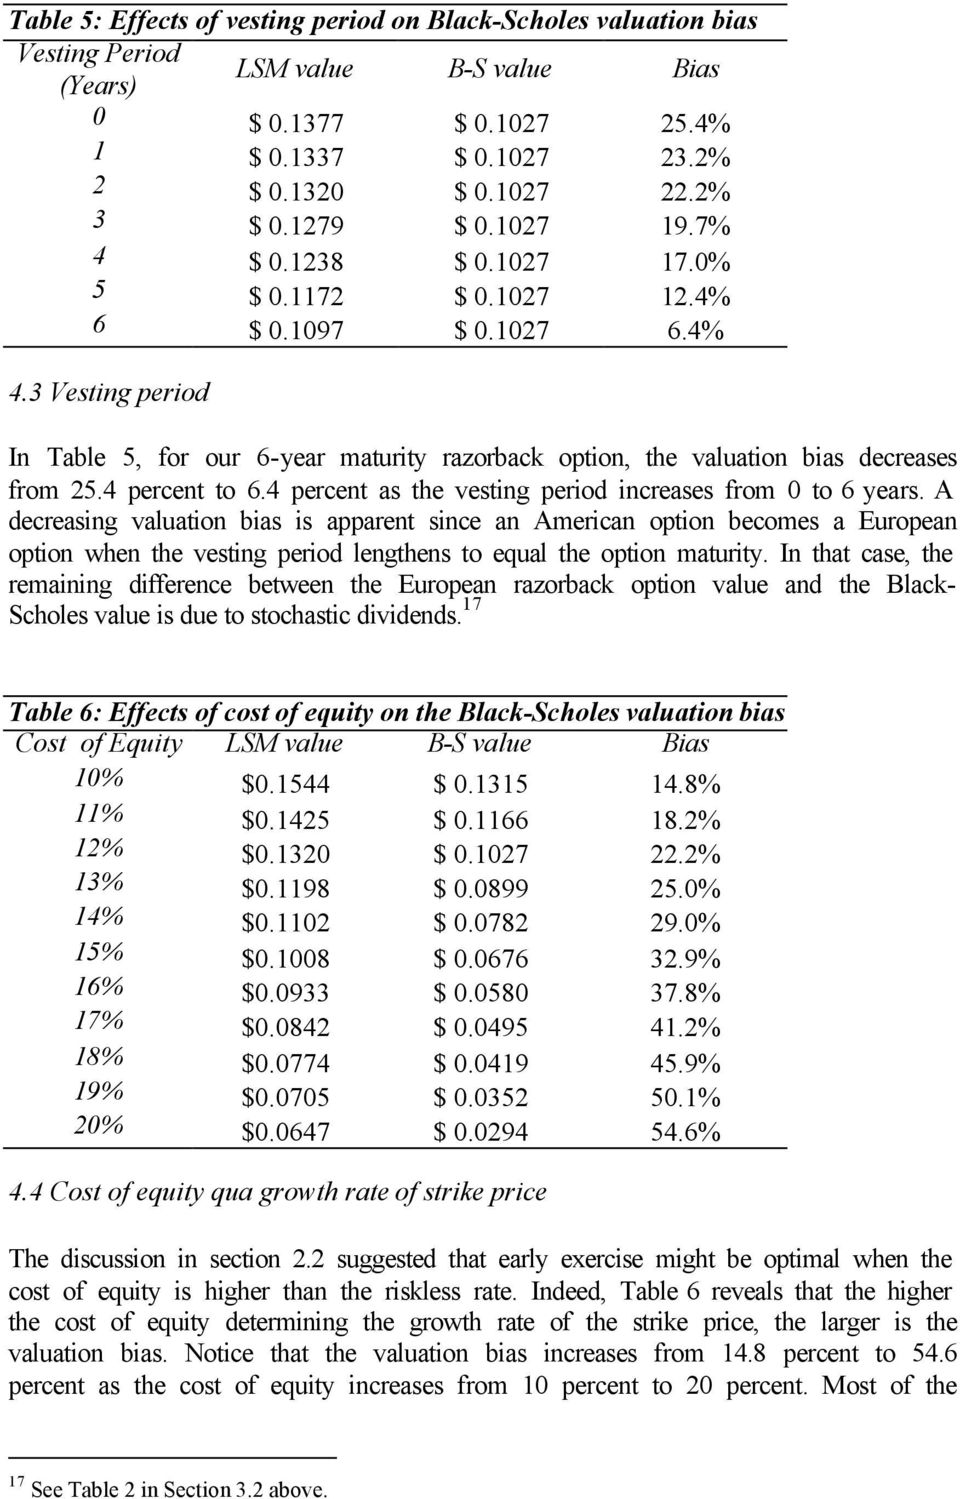 3 Vesting period In Table 5, for our 6-year maturity razorback option, the valuation bias decreases from 25.4 percent to 6.4 percent as the vesting period increases from 0 to 6 years.